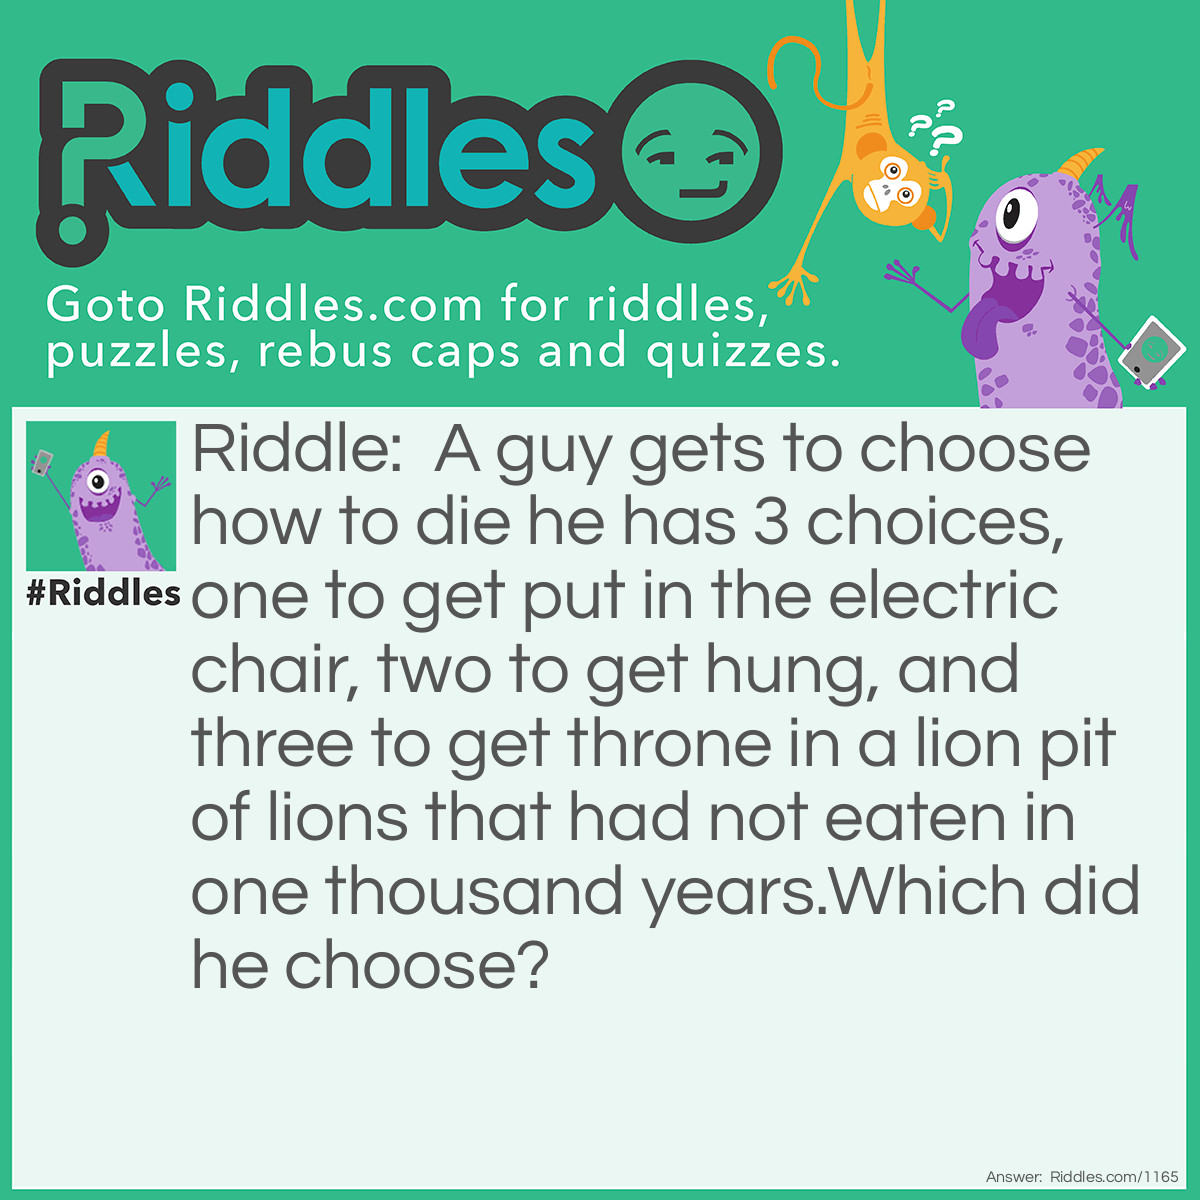 Riddle: A guy gets to choose how to die. He has 3 choices, one to get put in the electric chair, two to get hung, and three to get thrown into a lion pit of lions that had not eaten in one thousand years.
Which did he choose? Answer: The lion pit because they had not eaten in one thousand years so they were already dead.